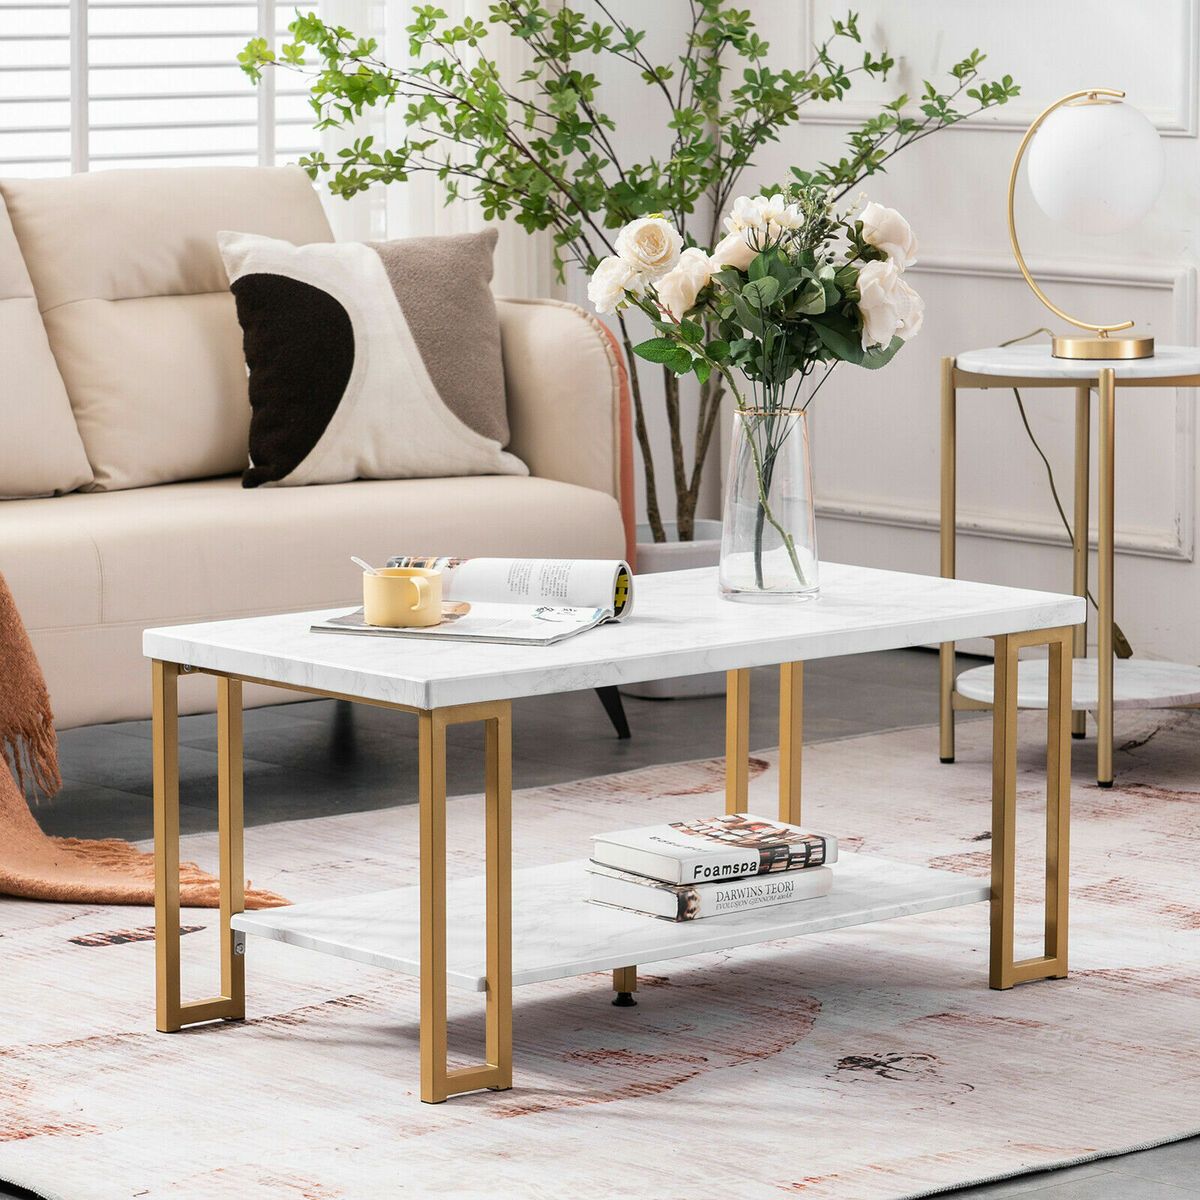 Us Living Room Rectangle Coffee Table W/ White Faux Marble Top &gold Base  Shelf | Ebay In Rectangular Coffee Tables With Pedestal Bases (View 6 of 15)